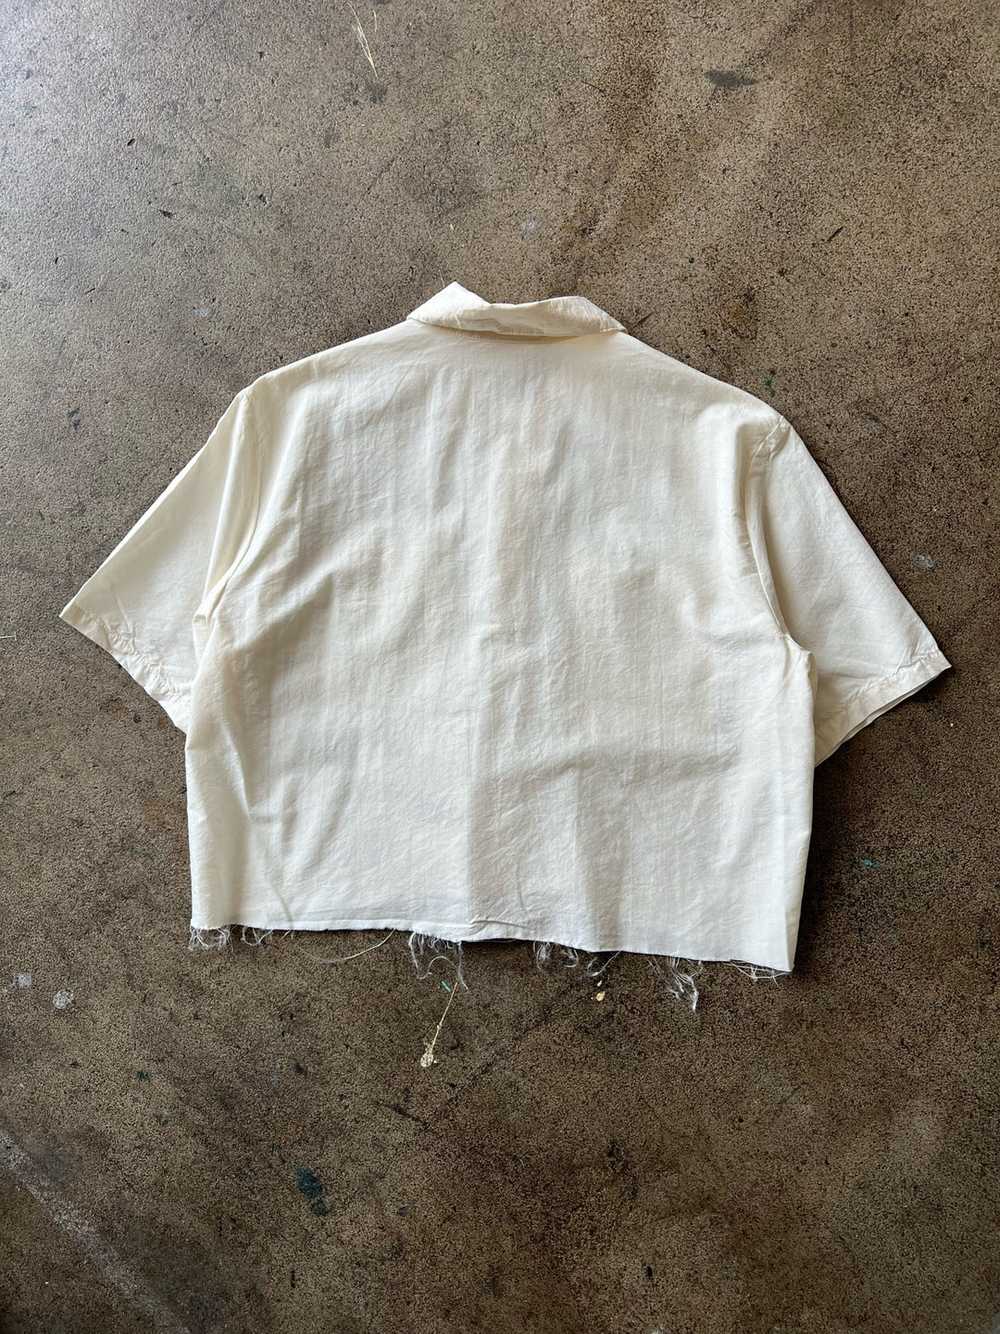 1990s Cropped Cream Two Pocket Shirt - image 3